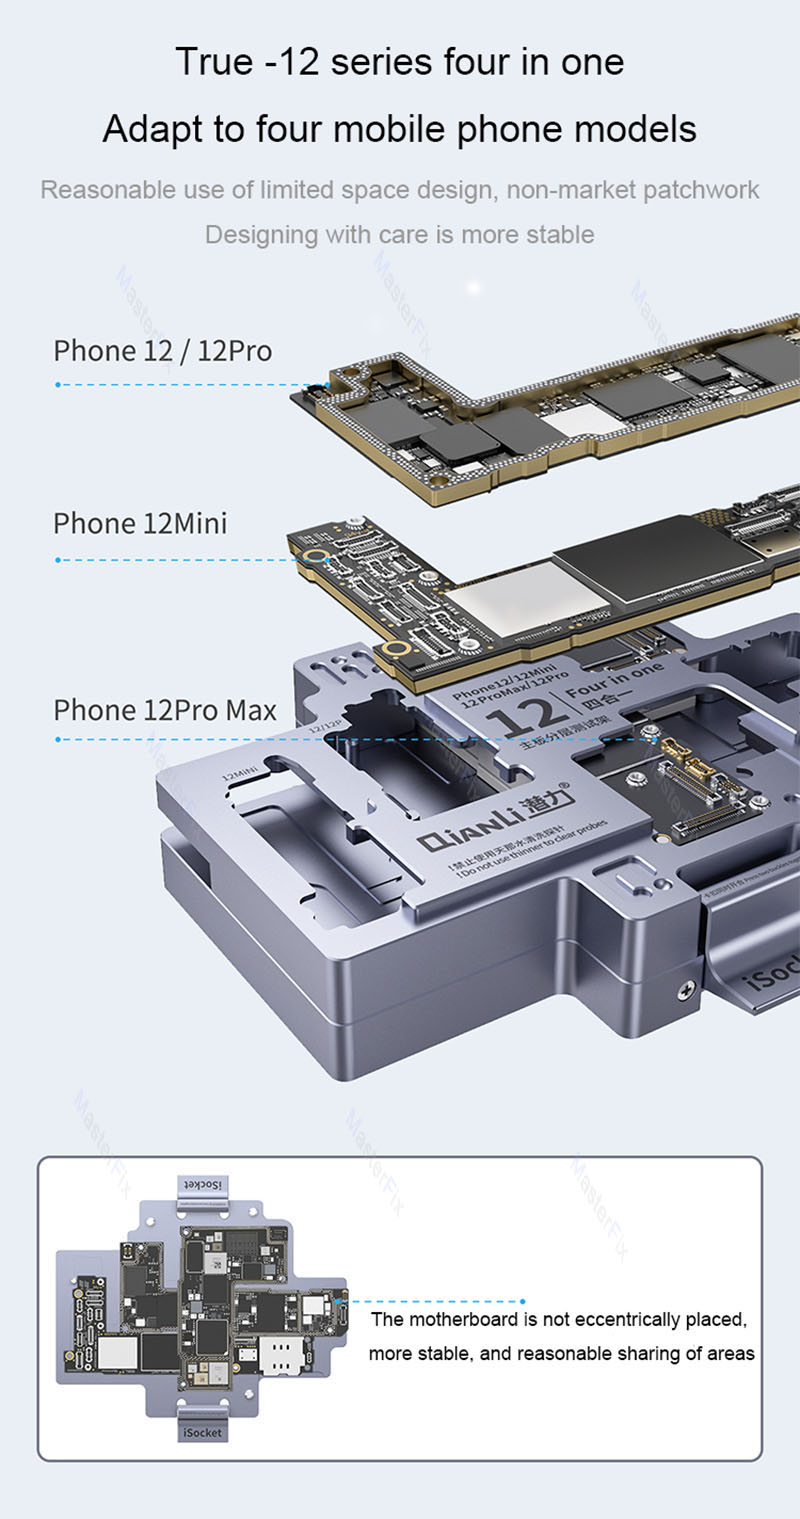 Qianli iSocket 12 Series 4 in 1 Motherboard Layered Test Stand for iPhone 12/12Pro/12Pro Max/12 Mini Logic Board Test Fixture